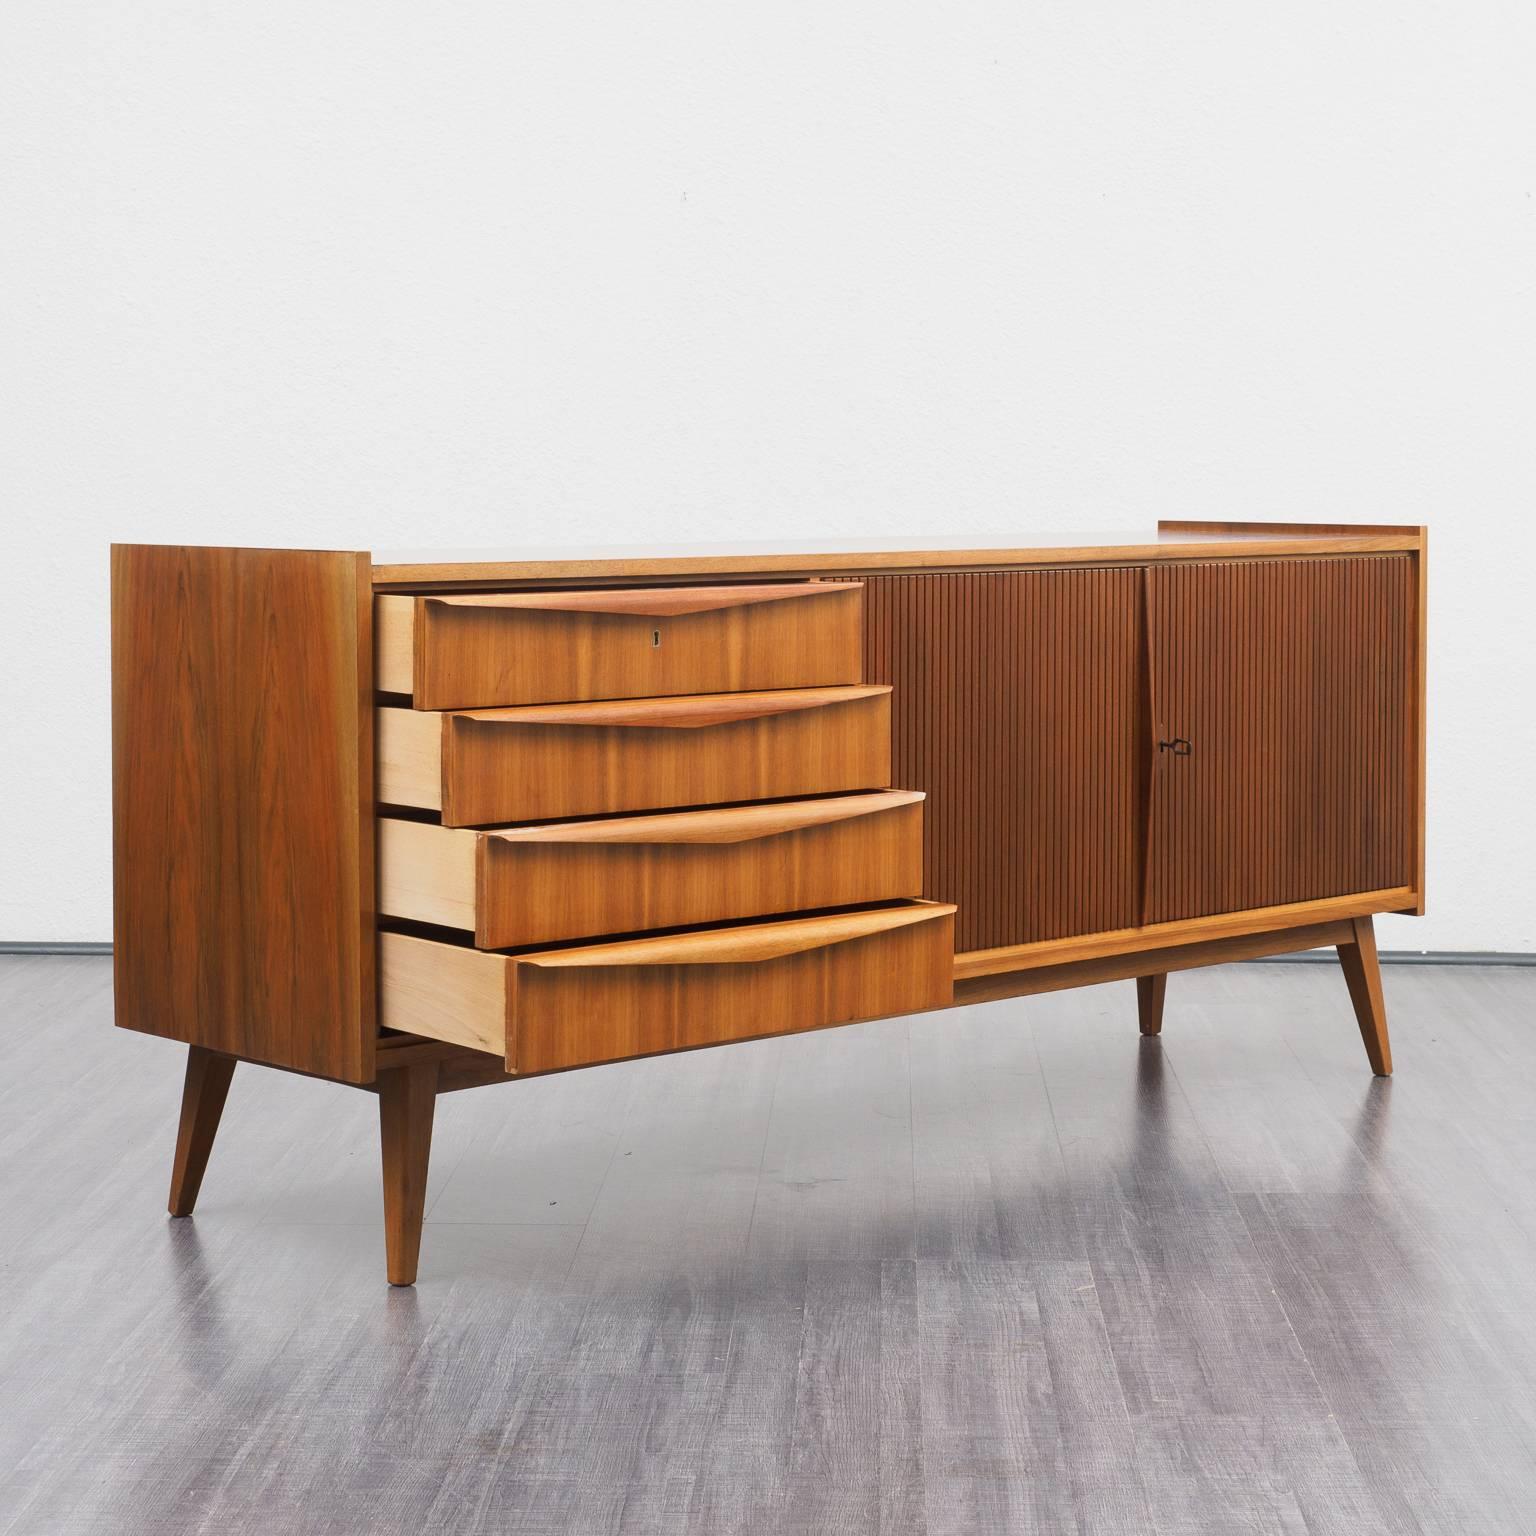 European Rare 1950s Sideboard with Structured Doors, Completely Restored